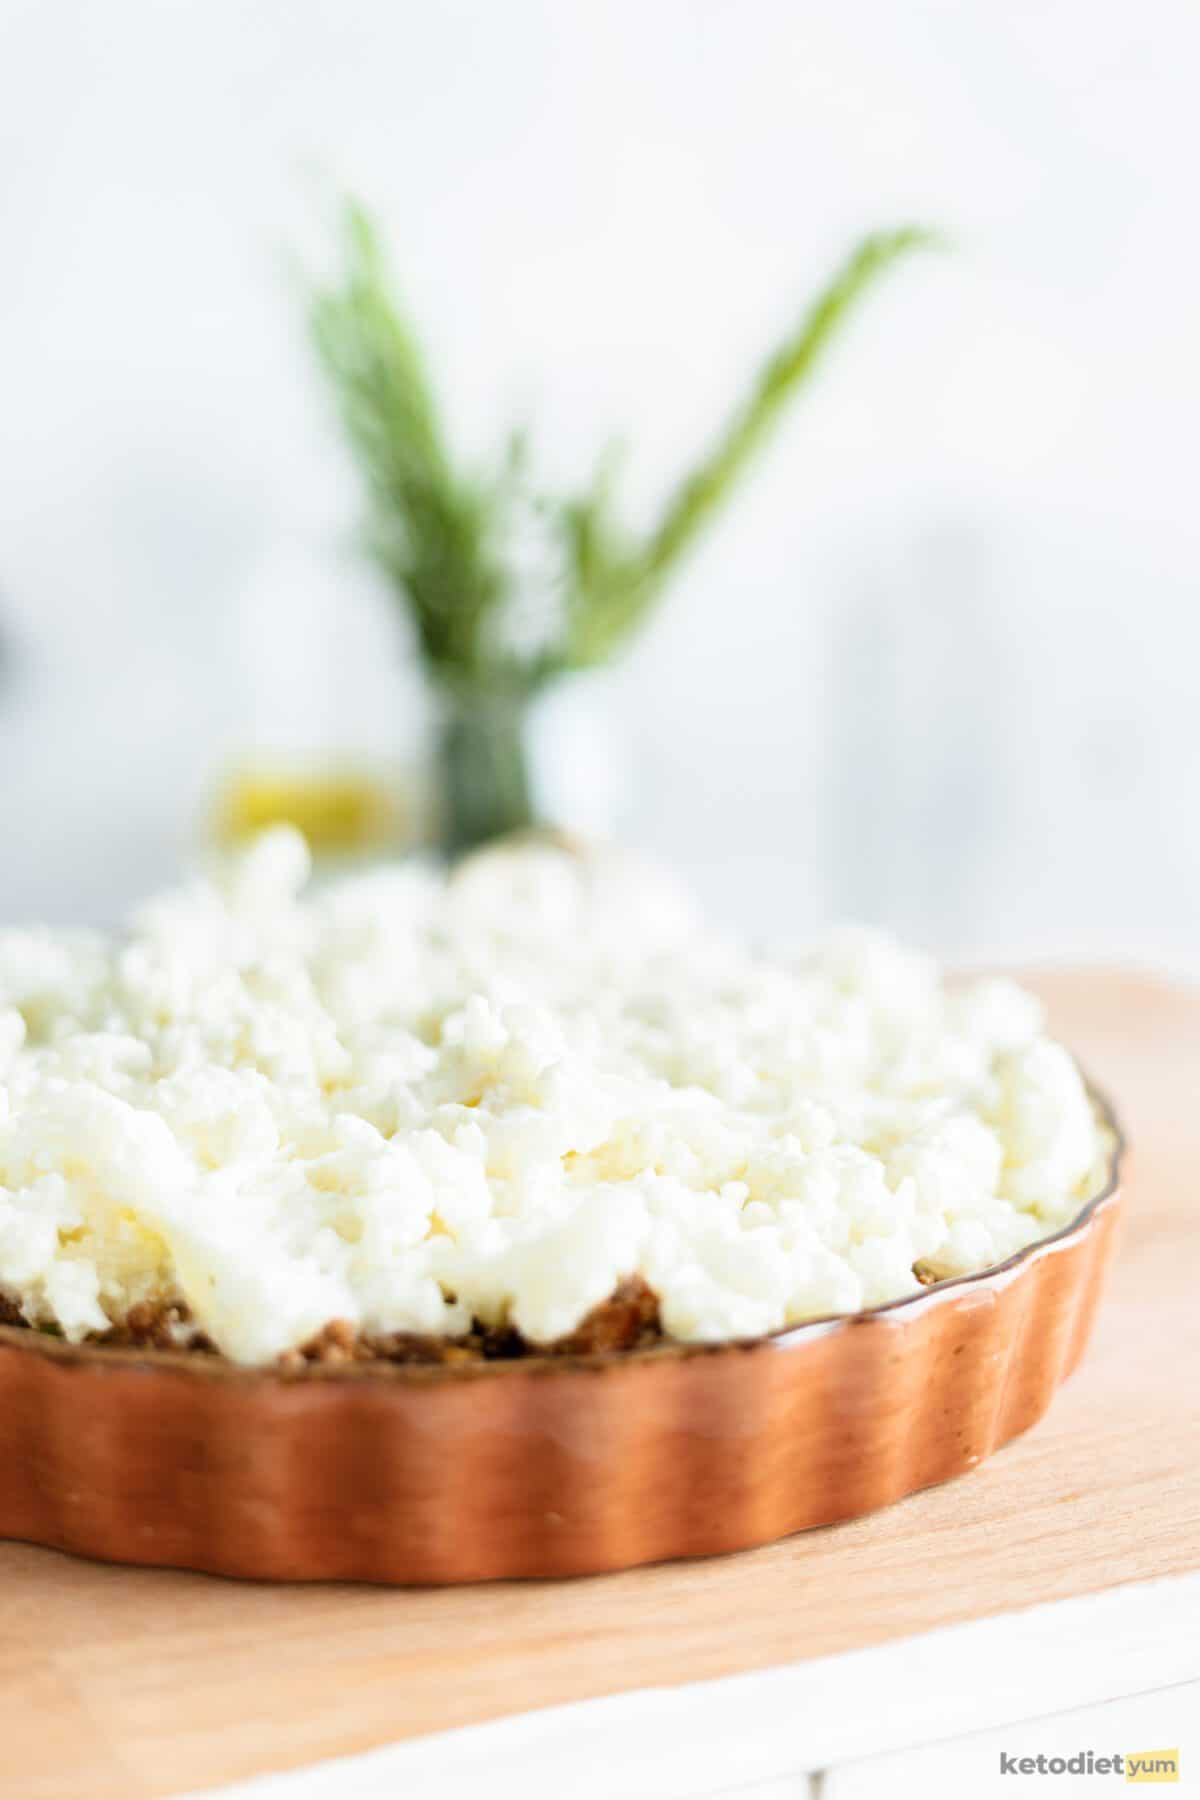 Baking dish topped with cauliflower sitting on a wooden board with a jar of fresh rosemary in the background